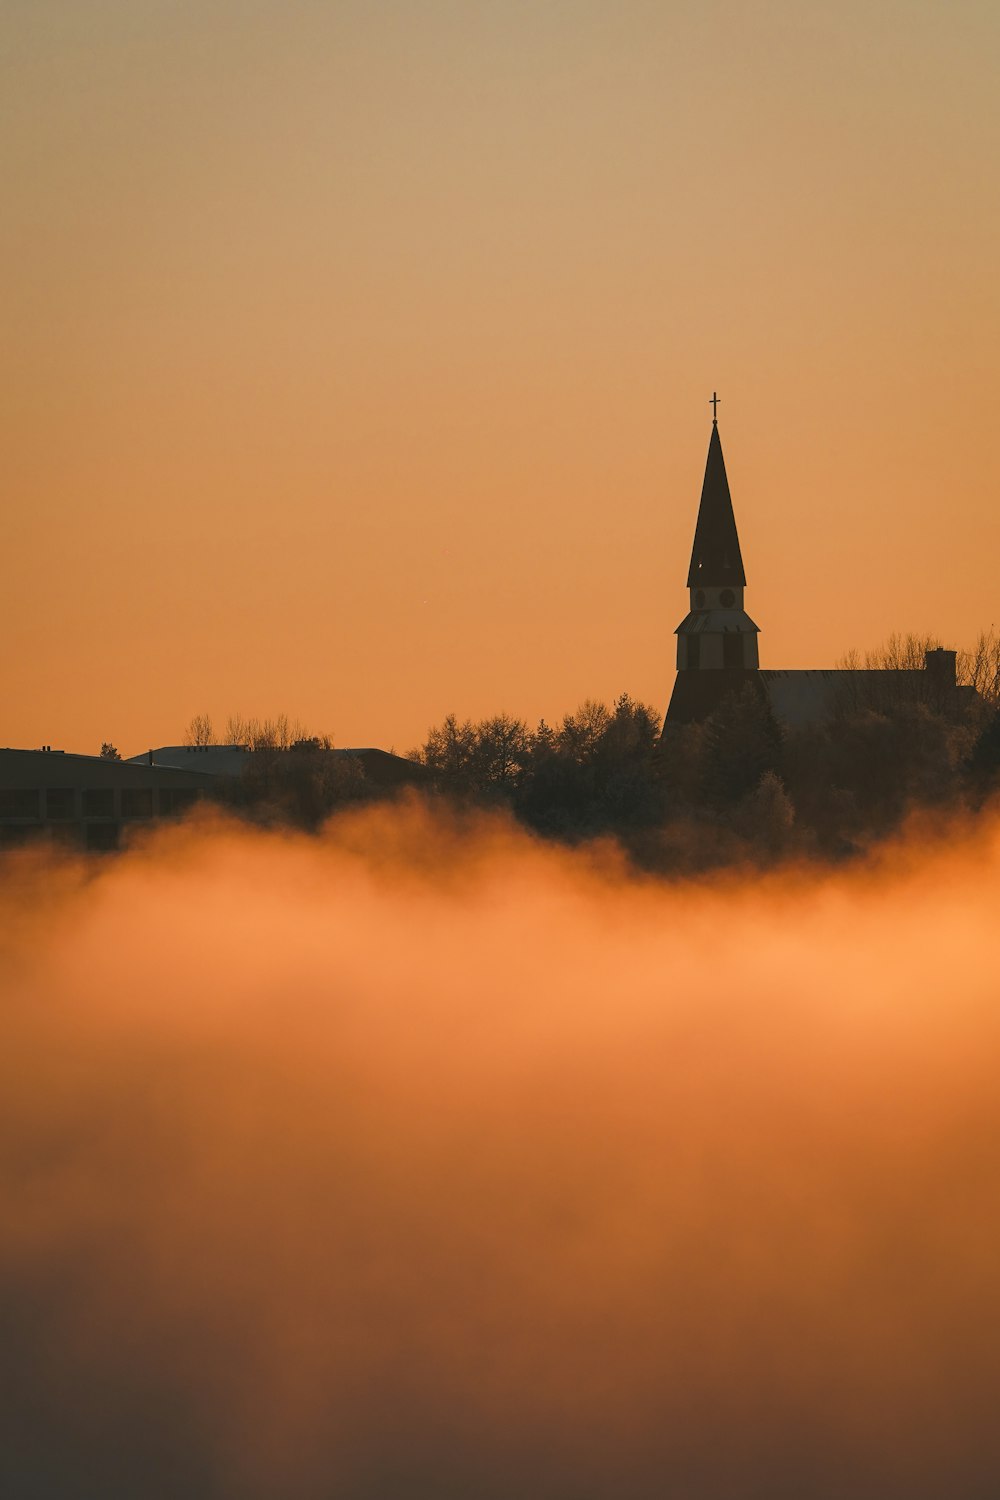 a church steeple rises above the clouds at sunset